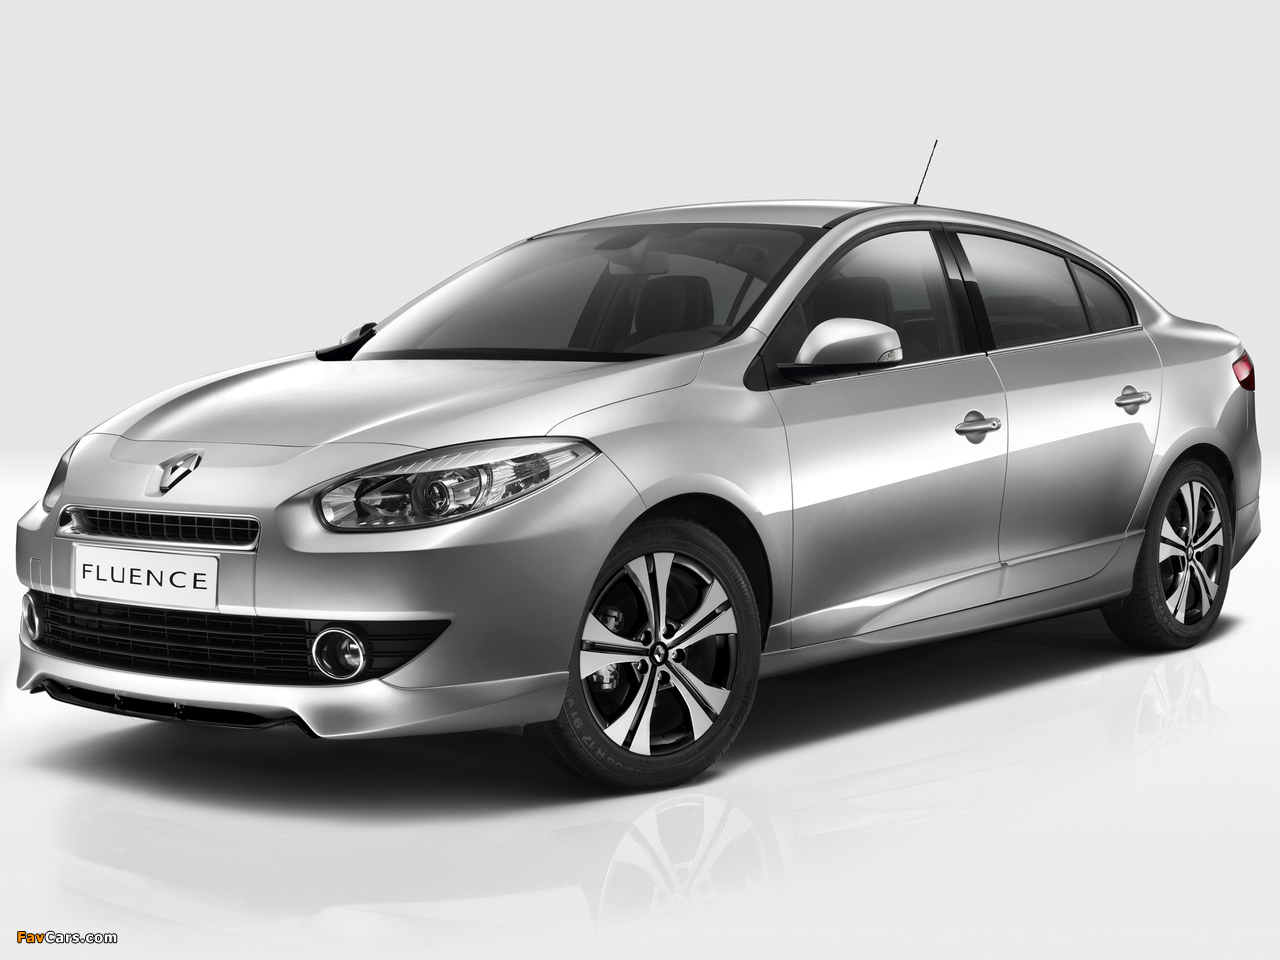 Renault Fluence Black Edition 2012 pictures (1280 x 960)